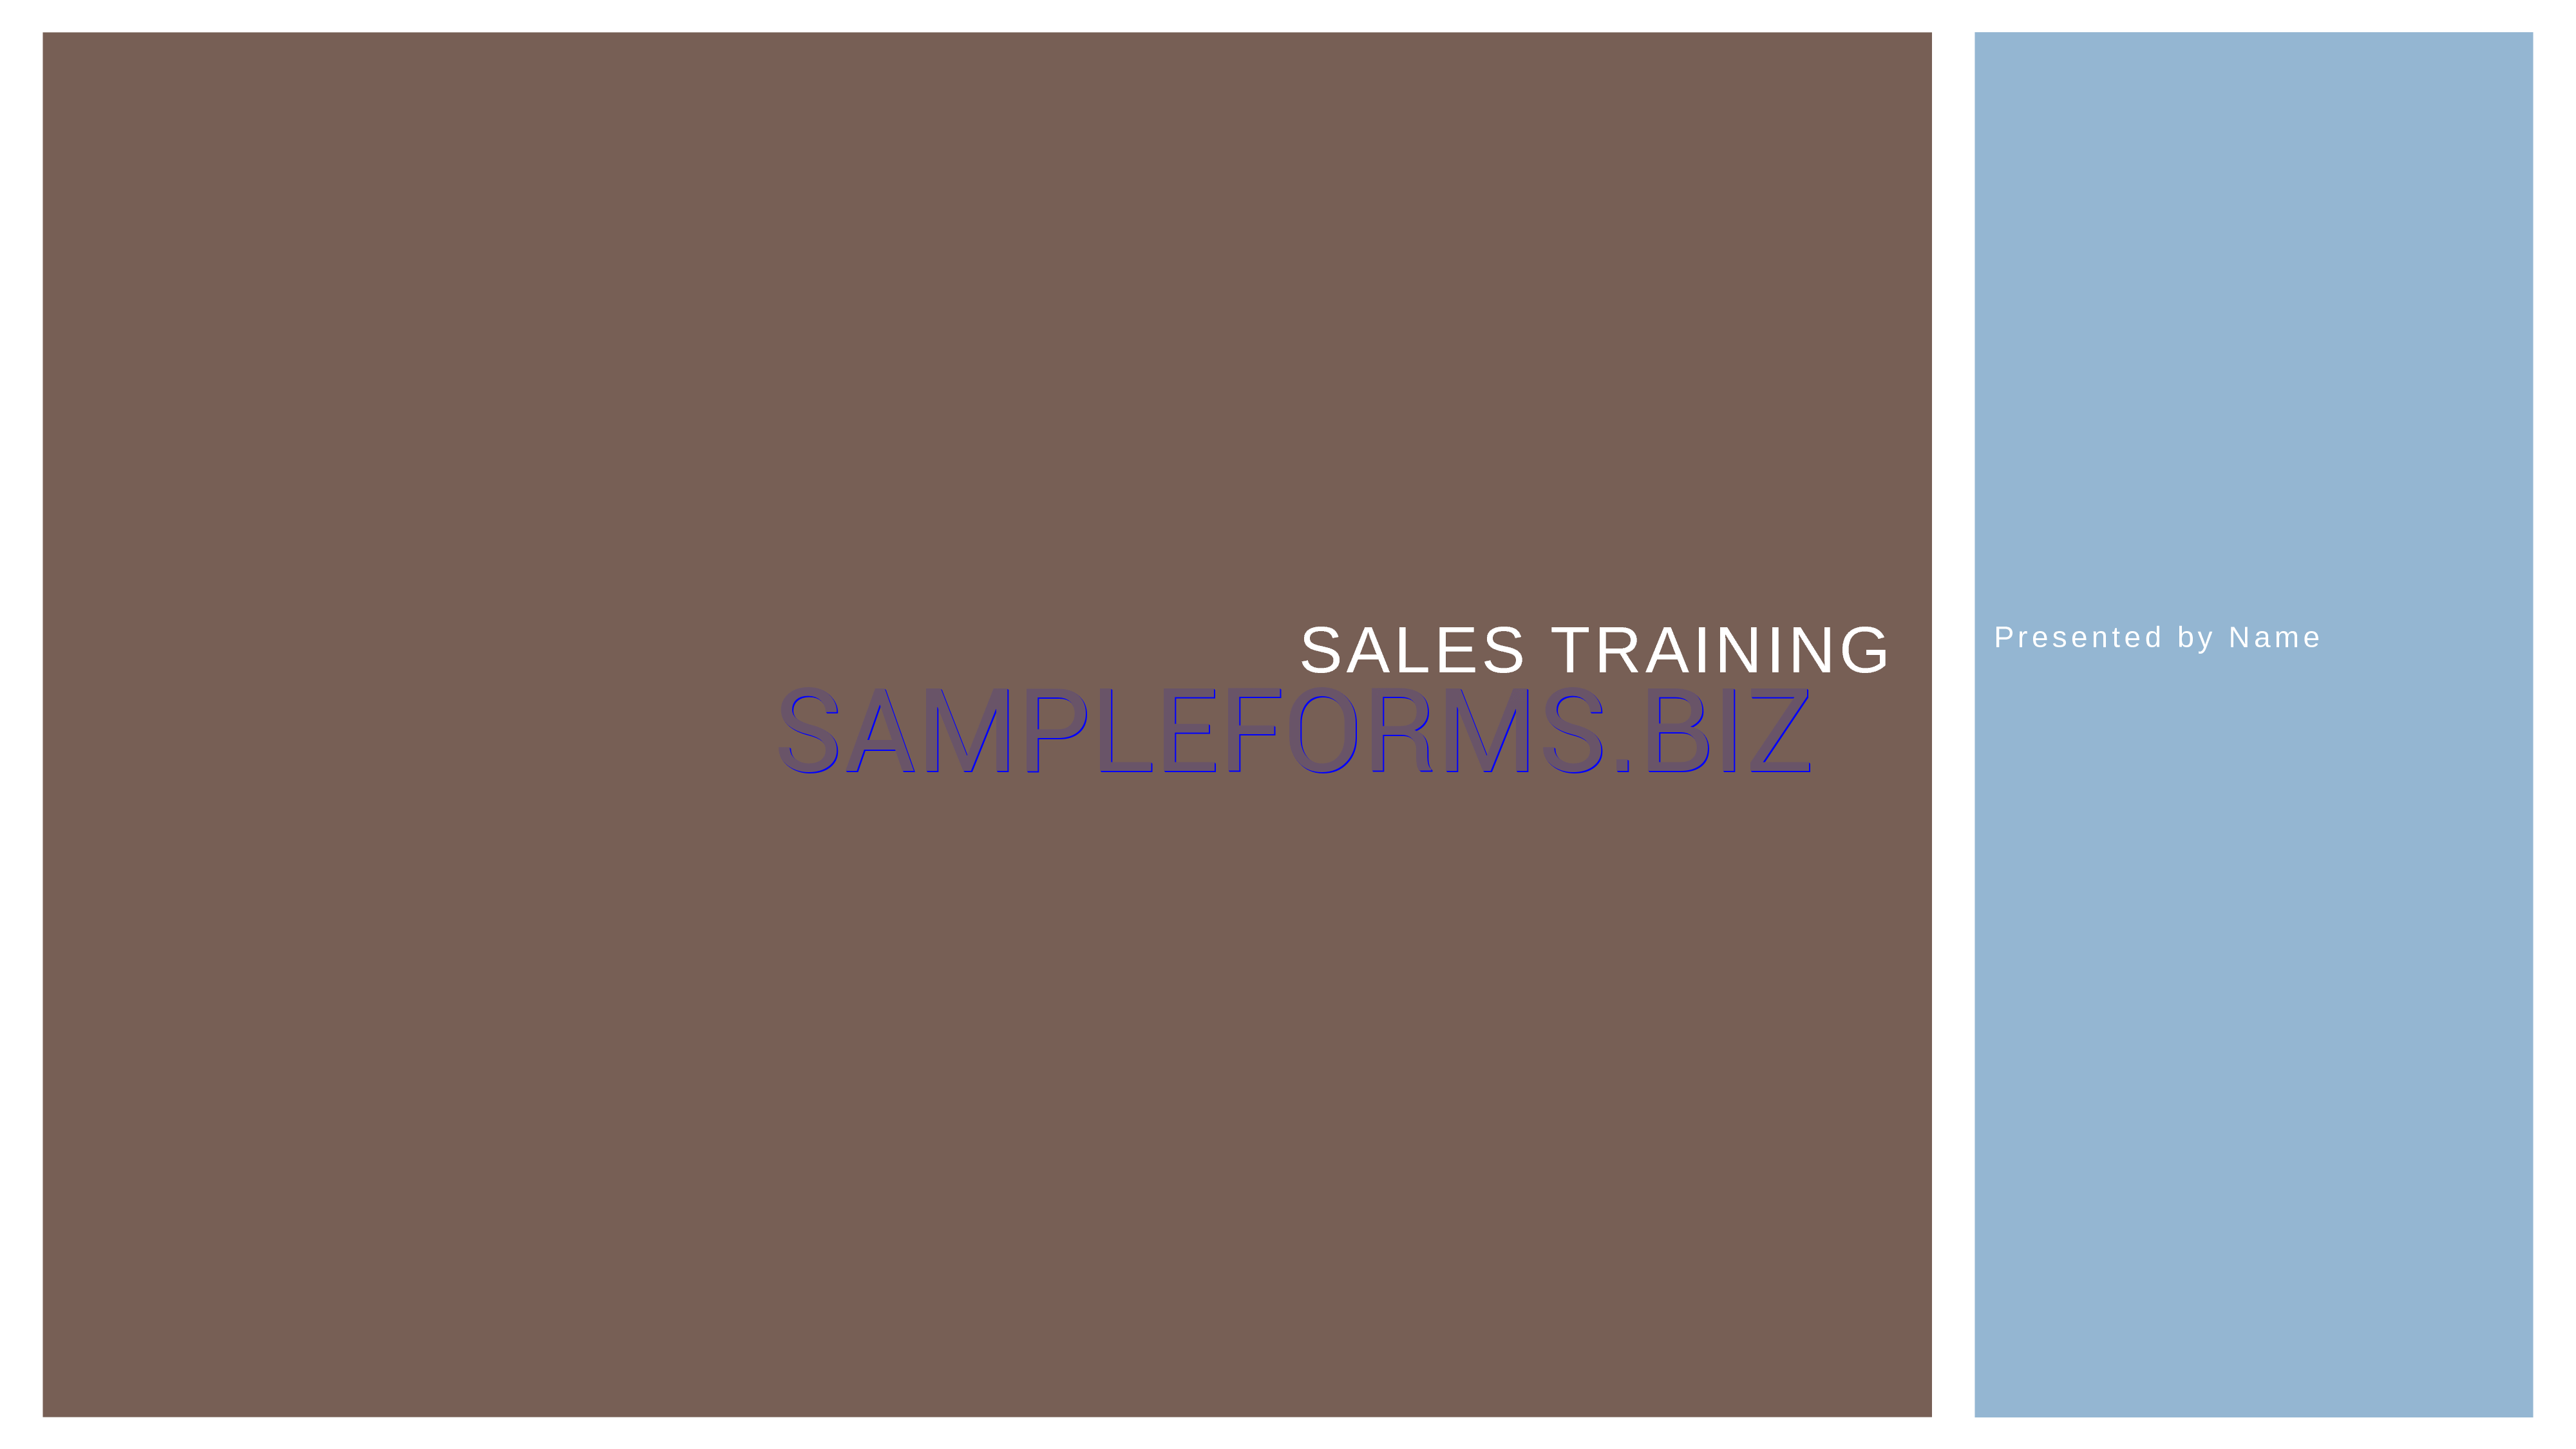 Preview free downloadable Business Sales Training Presentation in PDF (page 1)